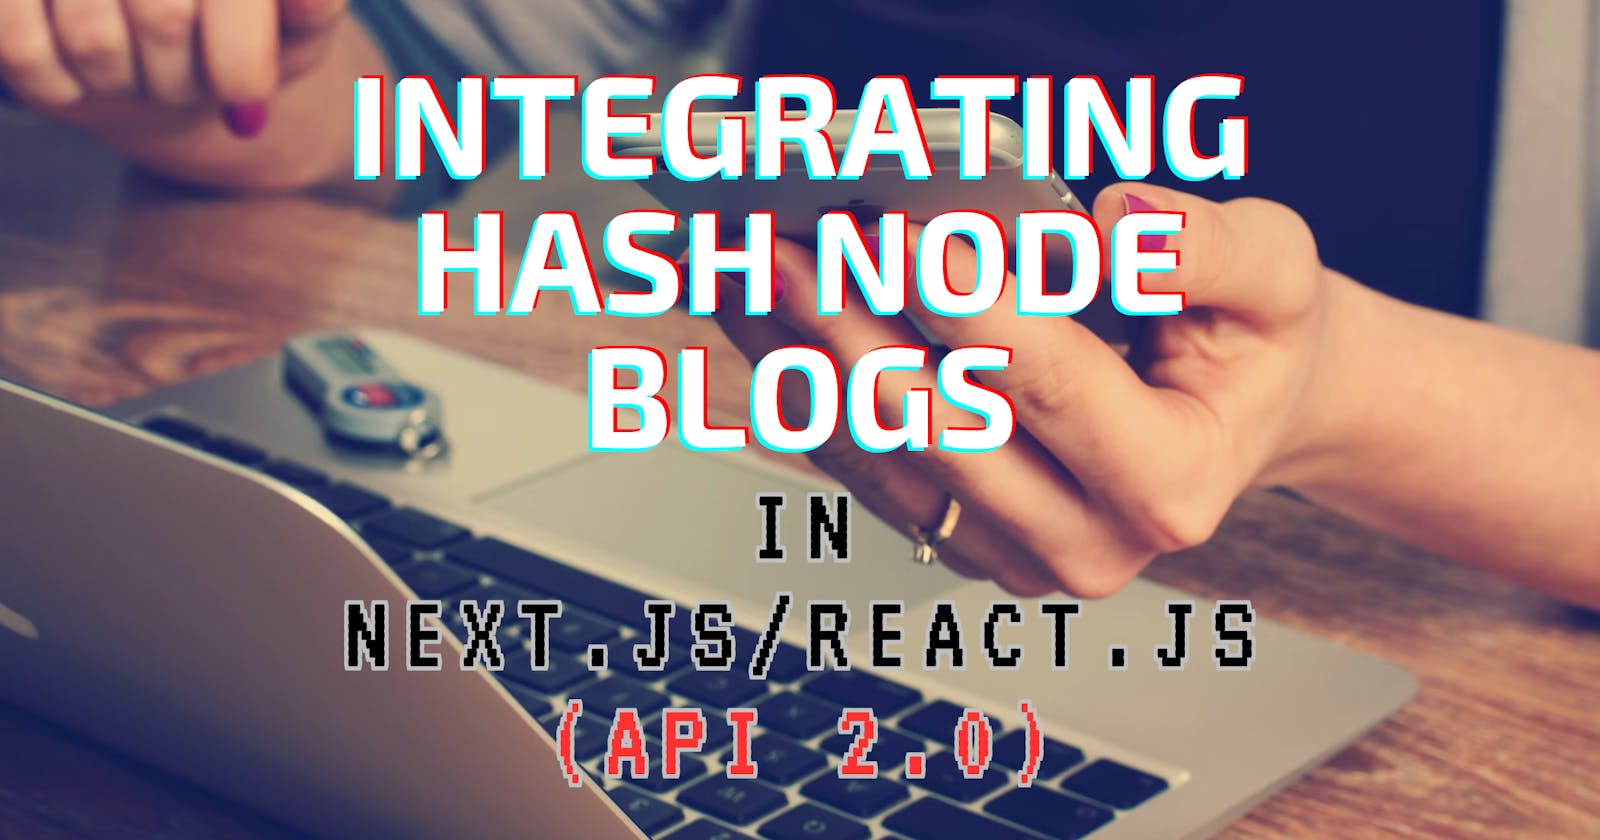 Integrating Hash node API 2.0: Fetching and Displaying Blogs on Your Website